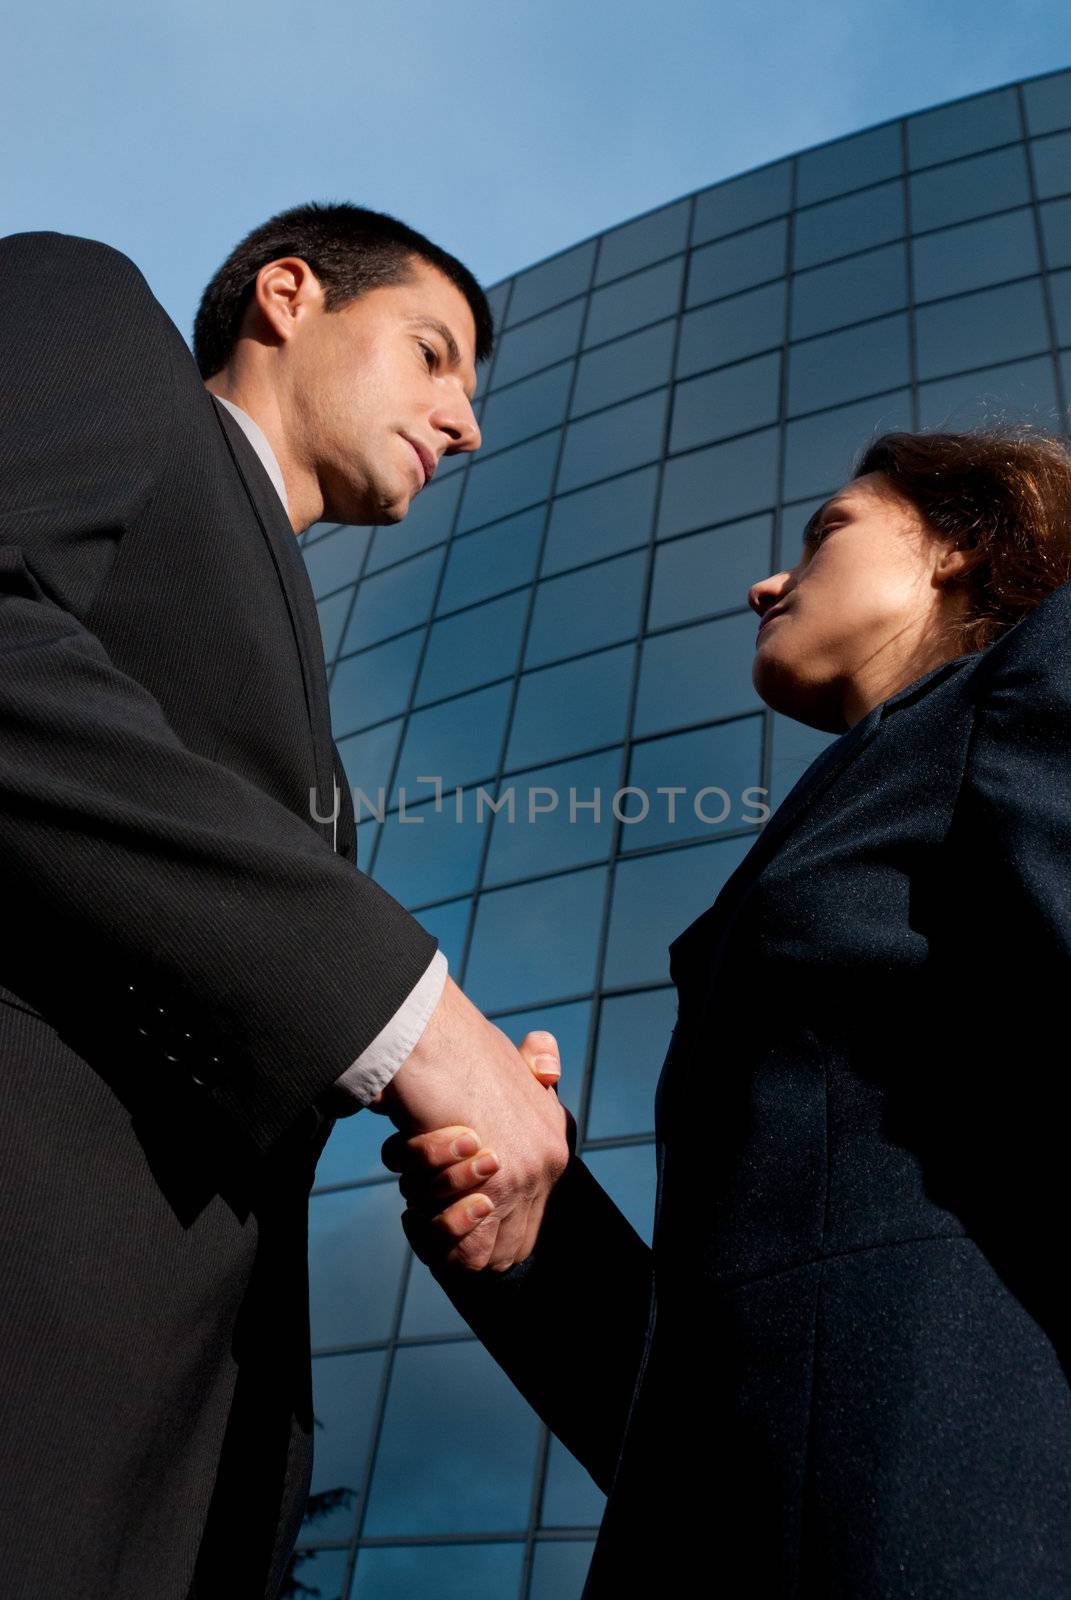 Handshake business man and woman on modern building background by dgmata